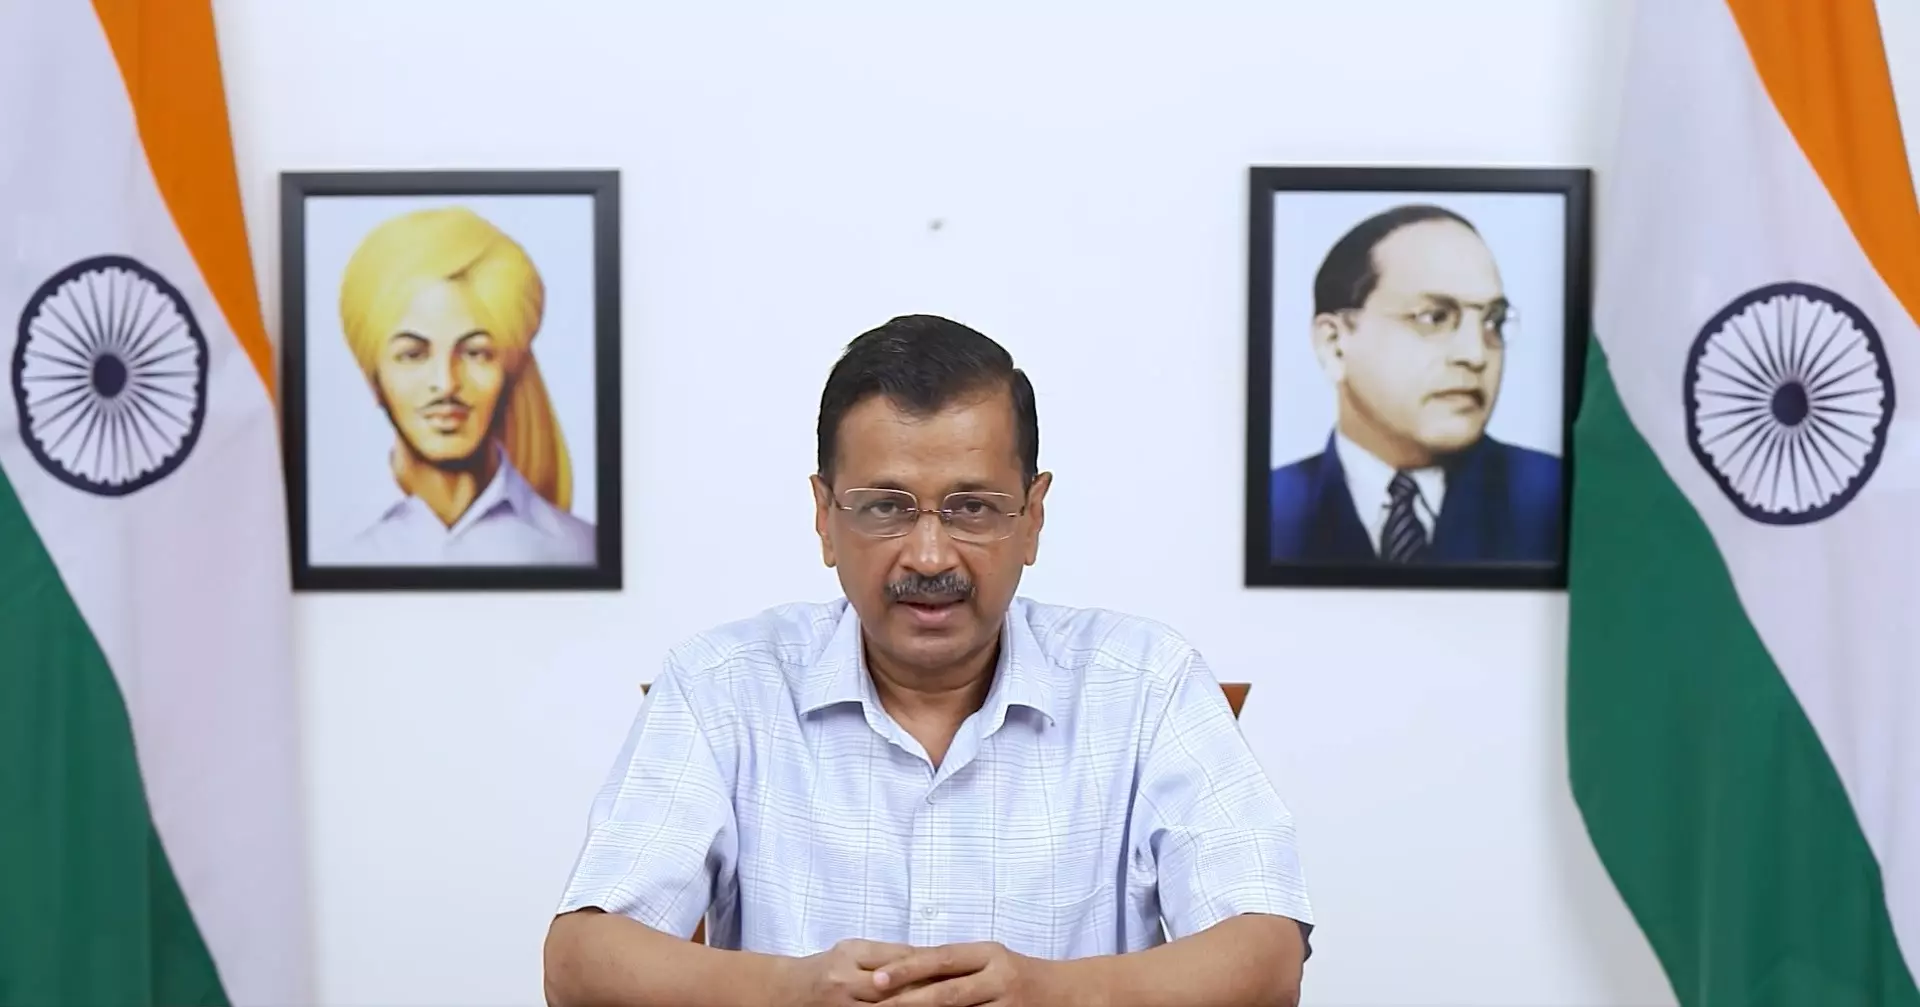 ‘Fight is with me, don’t torment my parents’: Kejriwal’s ‘appeal’ to Modi